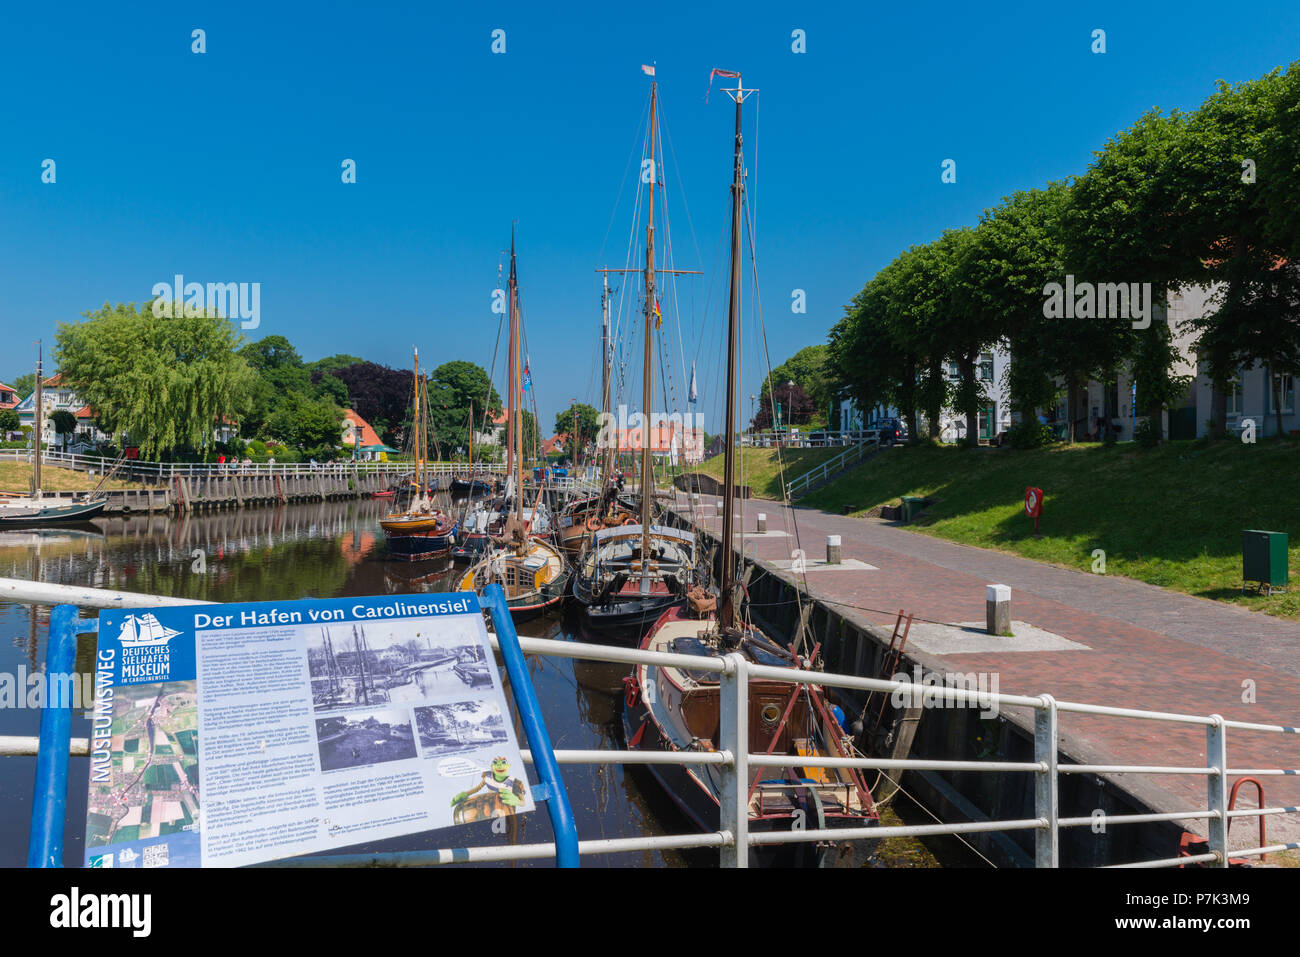 Traditional boats in the small habour of Sielort Carolinensiel, North Sea, East Frisia, Lower Saxony, Germany, Europe Stock Photo